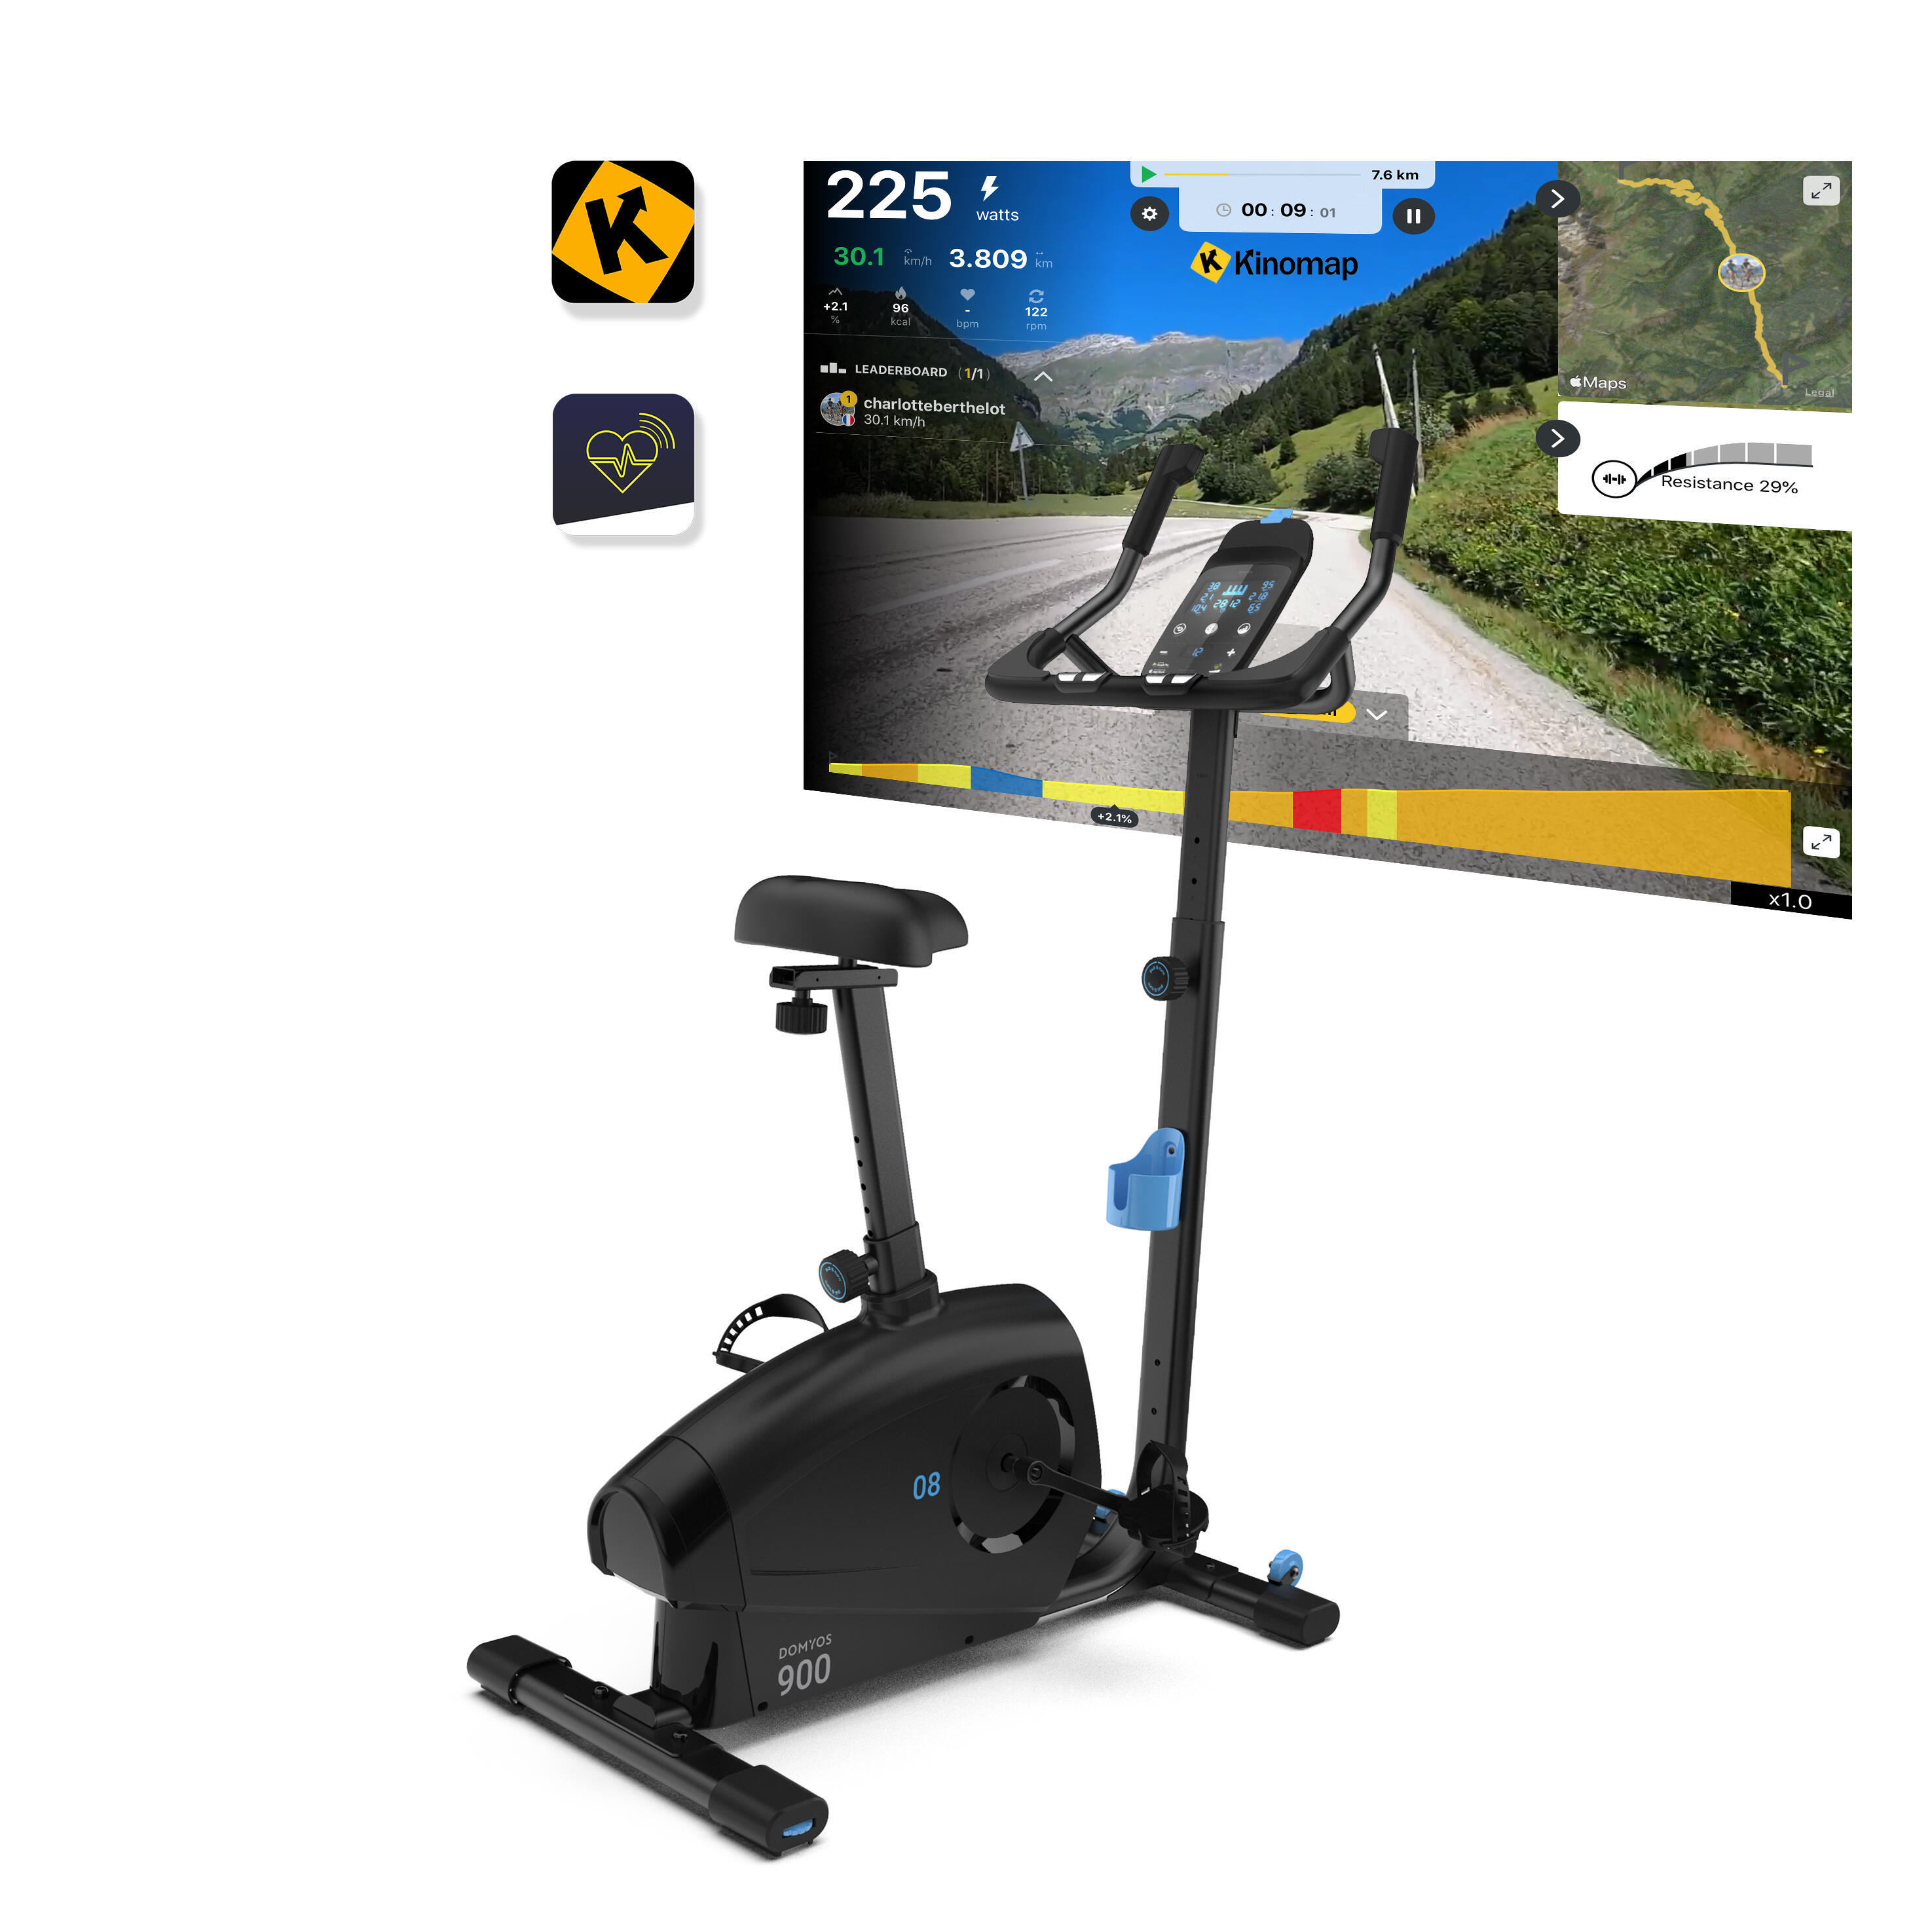 Self-Powered Exercise Bike 900 Connected to Coaching Apps 2/7